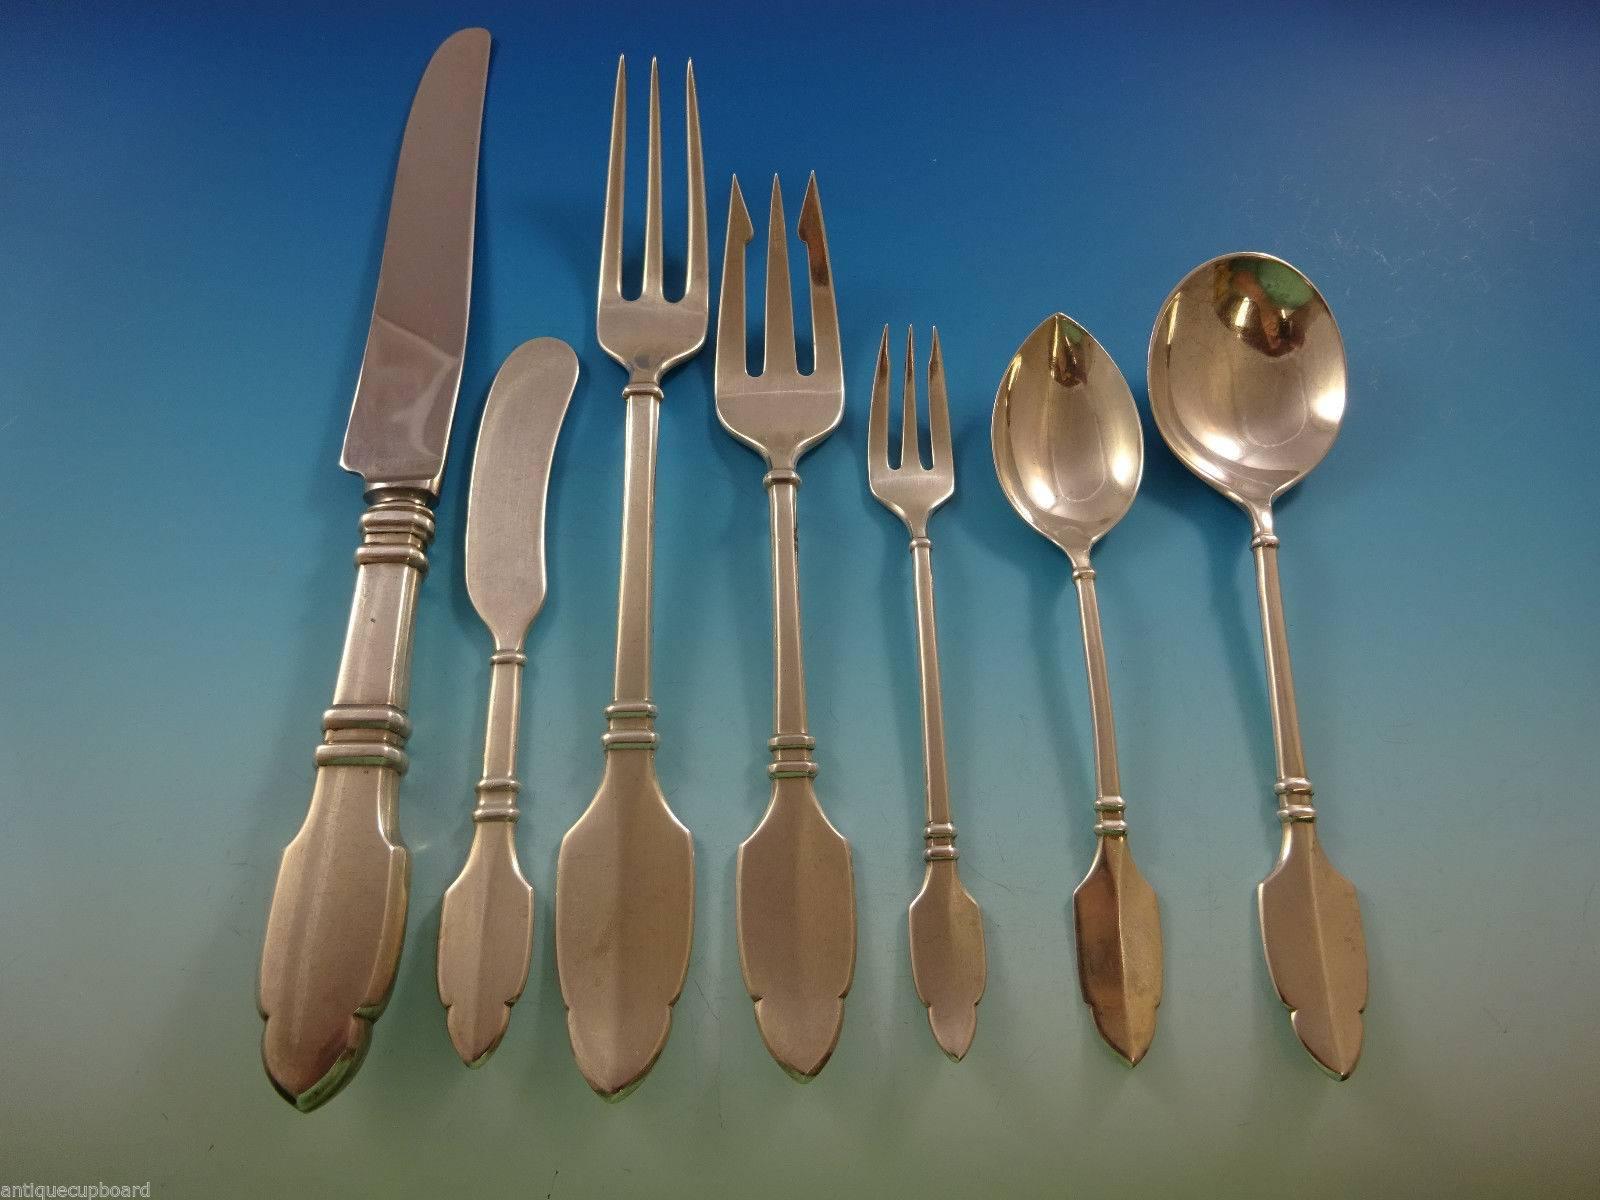 Rare Robert Bruce by Graff, Washbourne & Dunn sterling silver flatware set of 59 pieces, circa 1910. This set includes:

Eight dinner size knives, 9 3/4